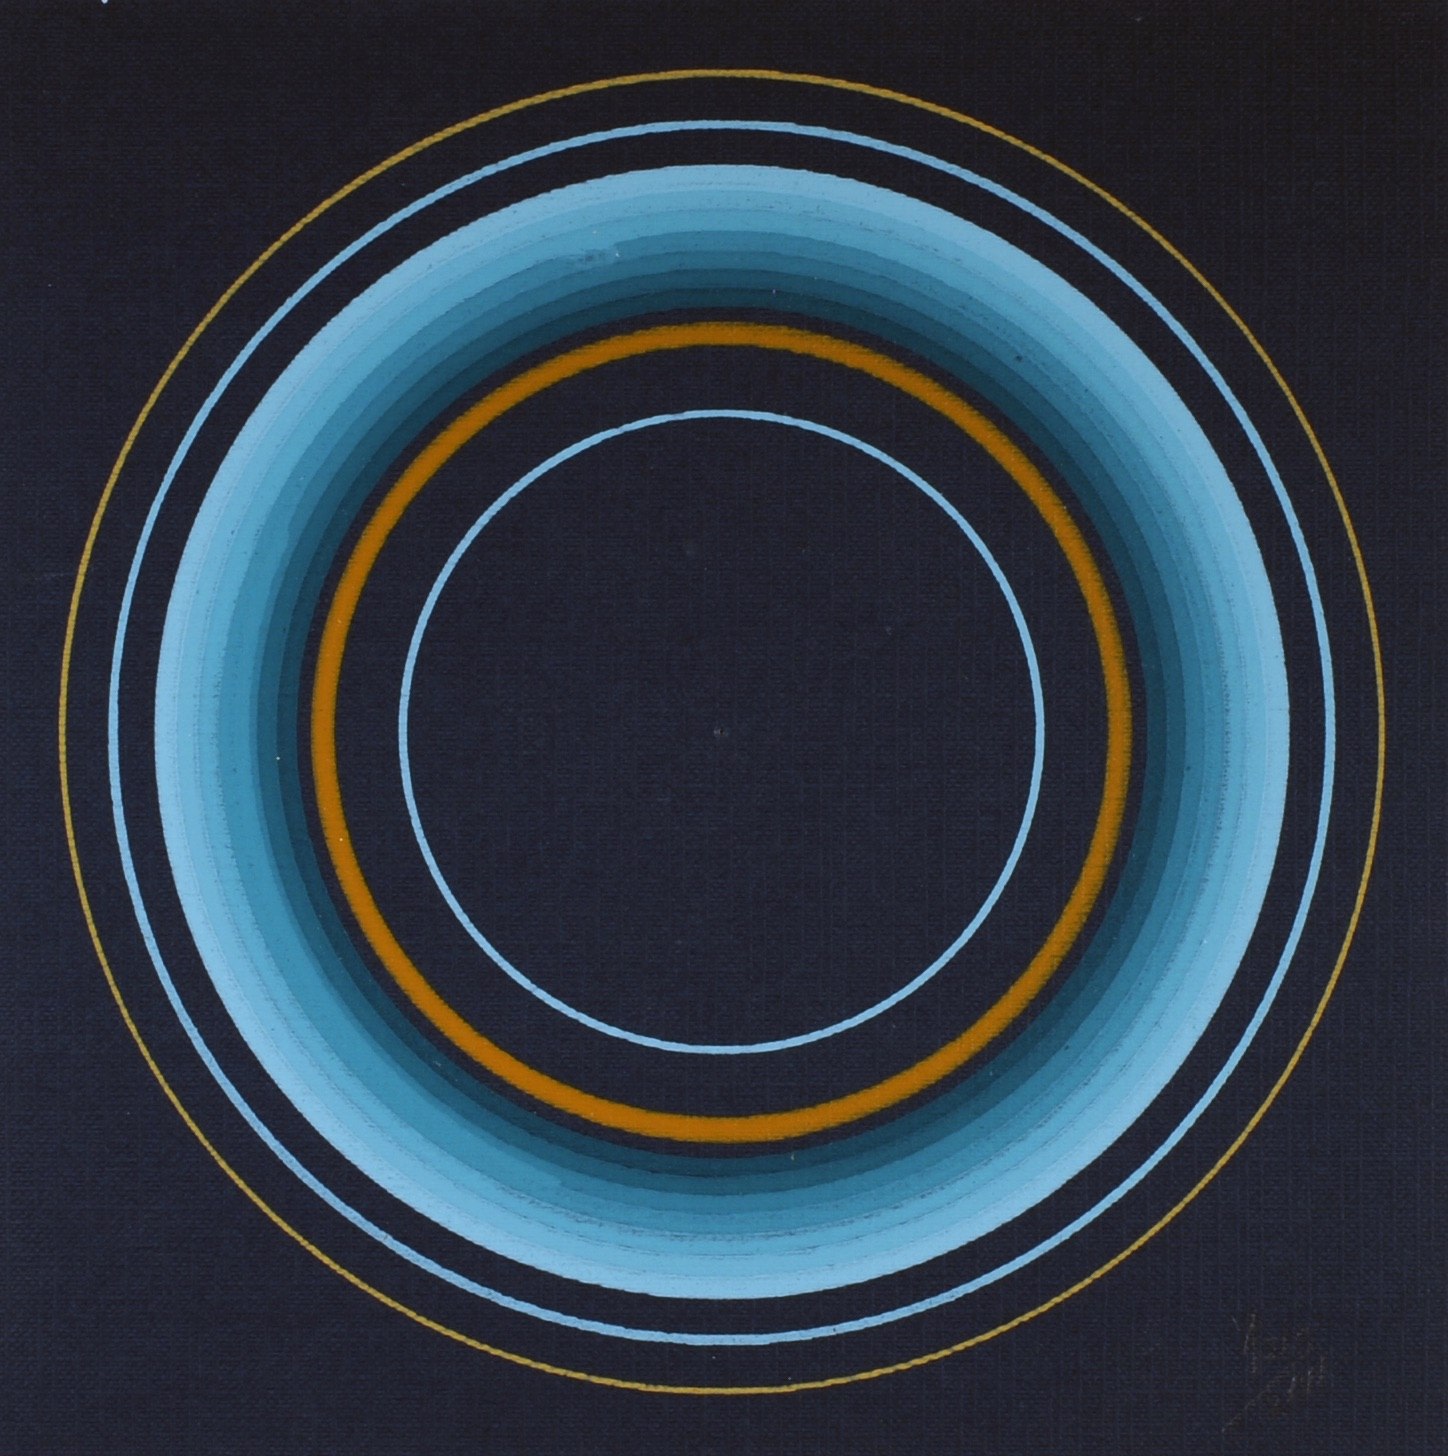 Antonio Asis,&nbsp;Untitled from the series Cercles Concentriques, 2011, Gouache on cardboard,&nbsp;7 3/8 x 7 1/2 in. (18.7 x 18.9 cm.)